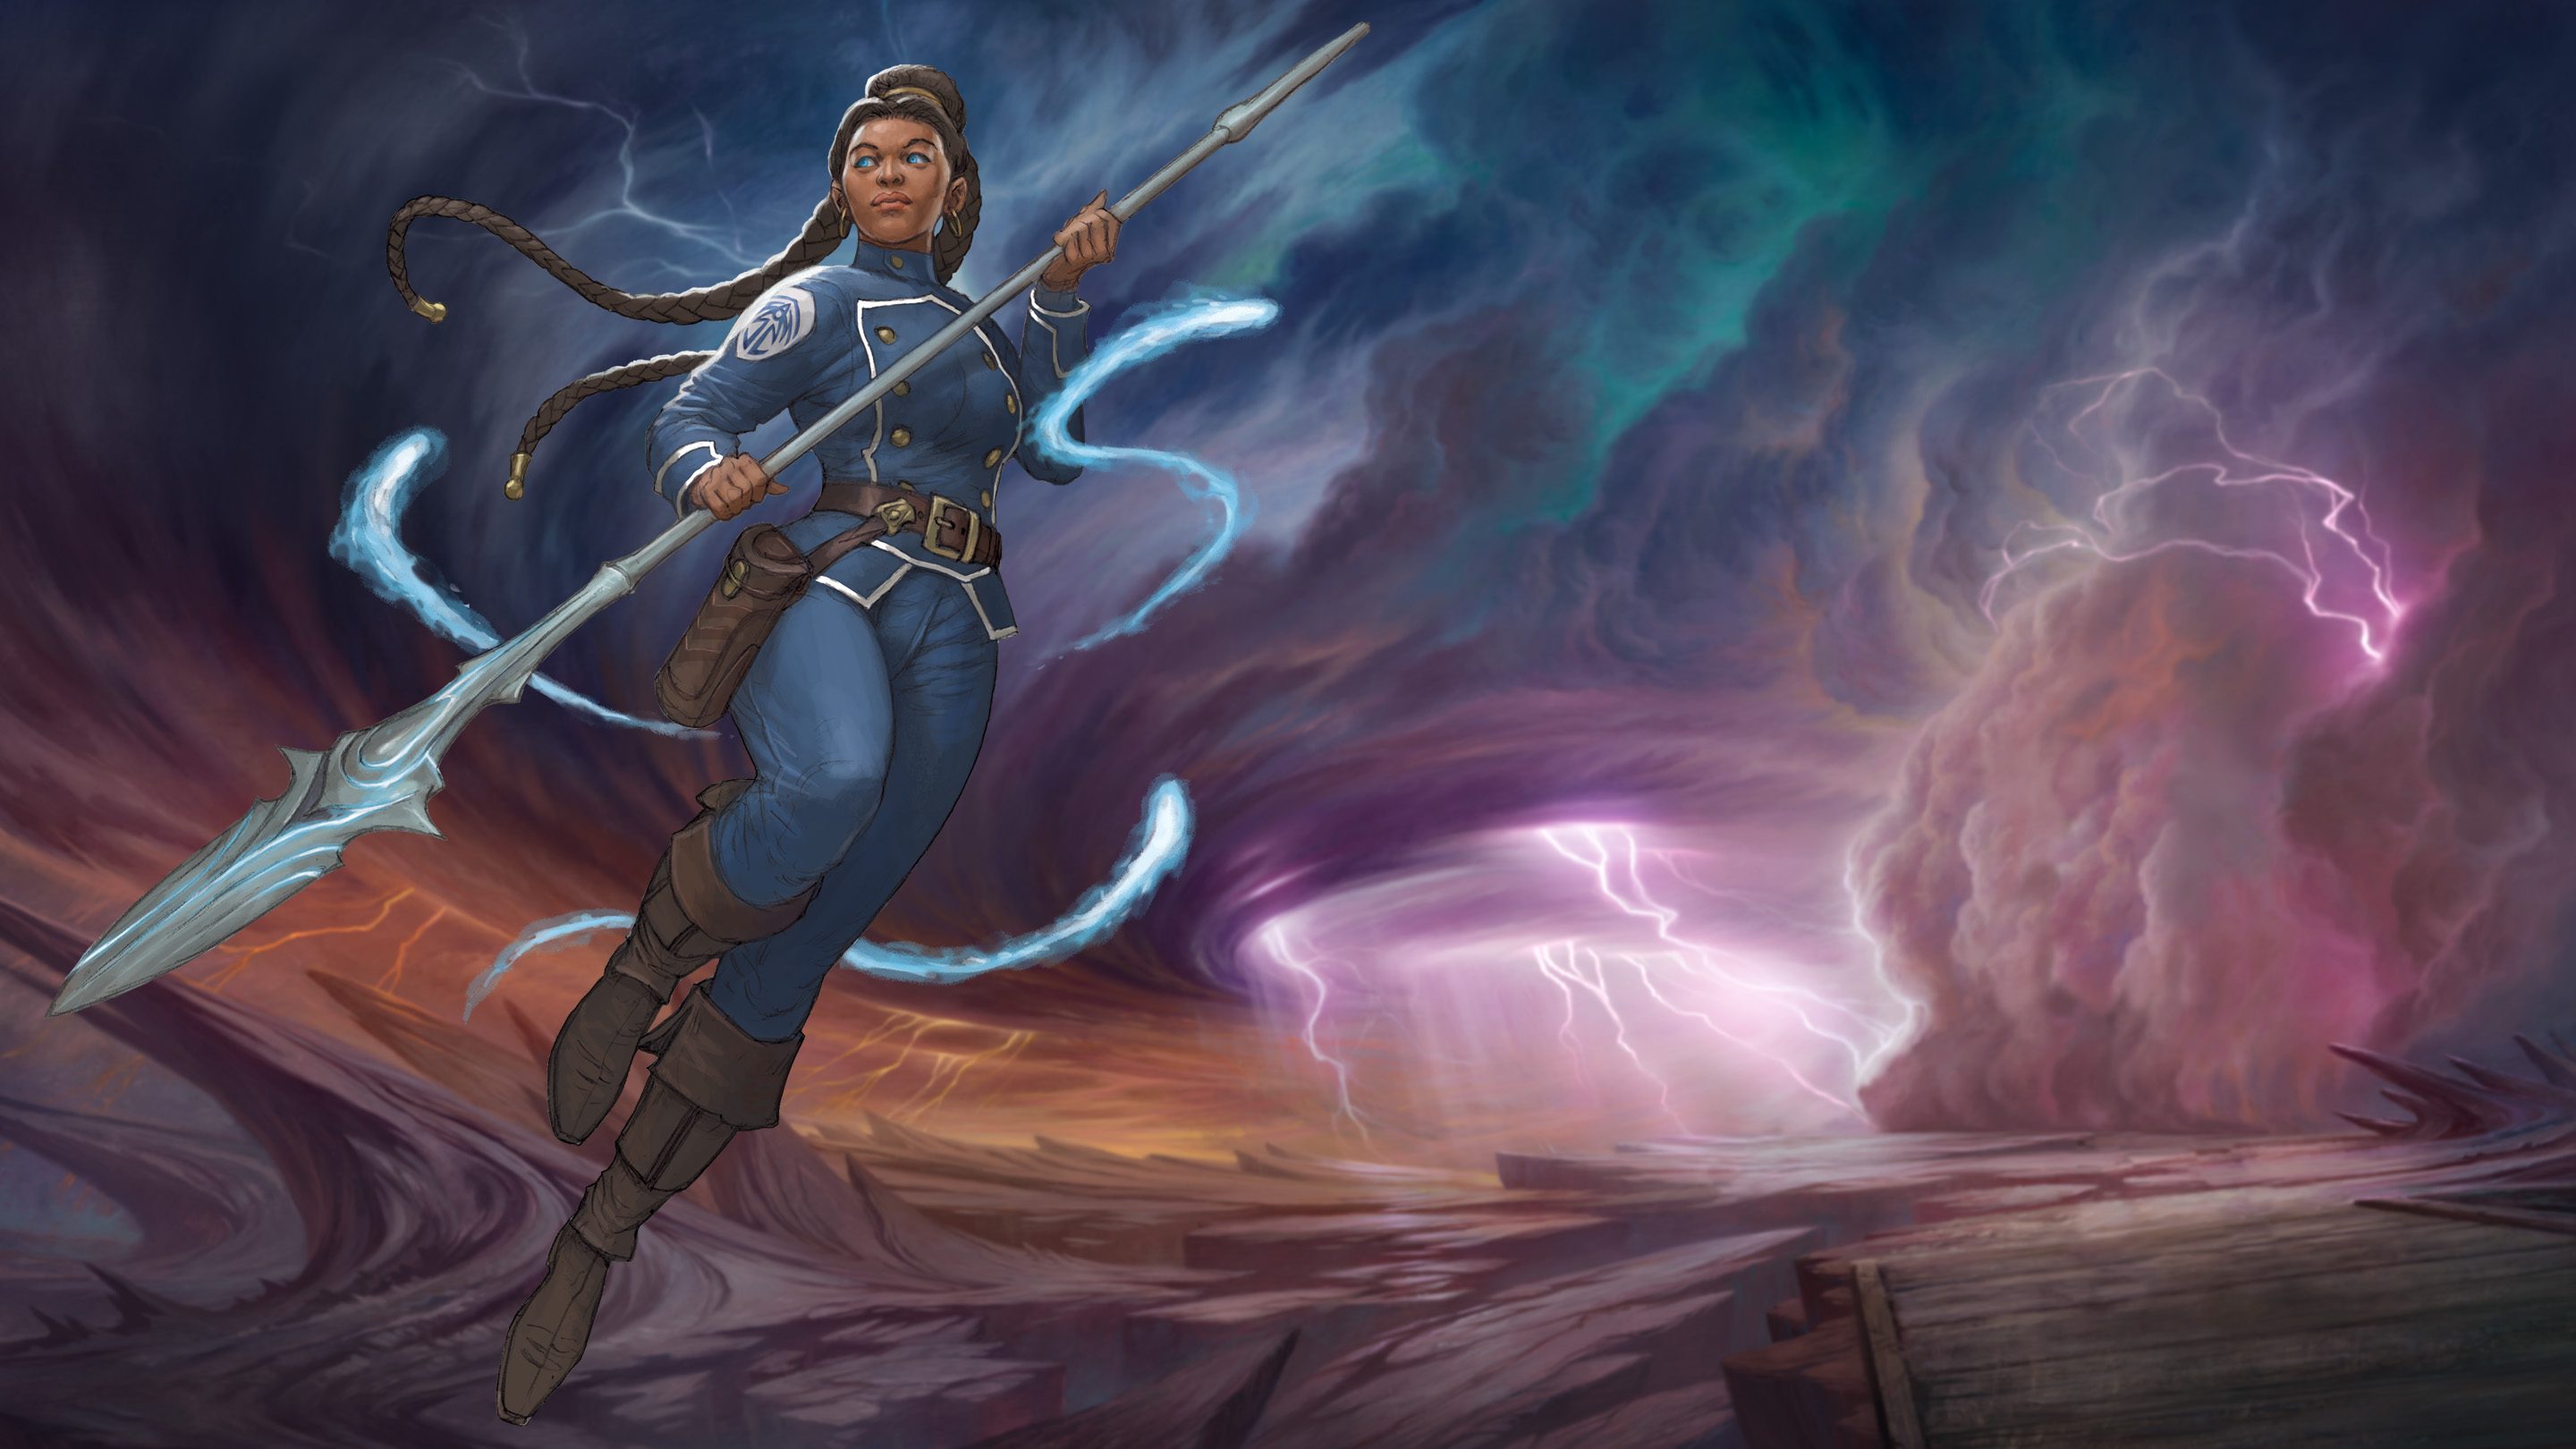 A woman flies through the air holding a glimmering silver staff. Behind her stormclouds roil in the distance, arcing down lighting.